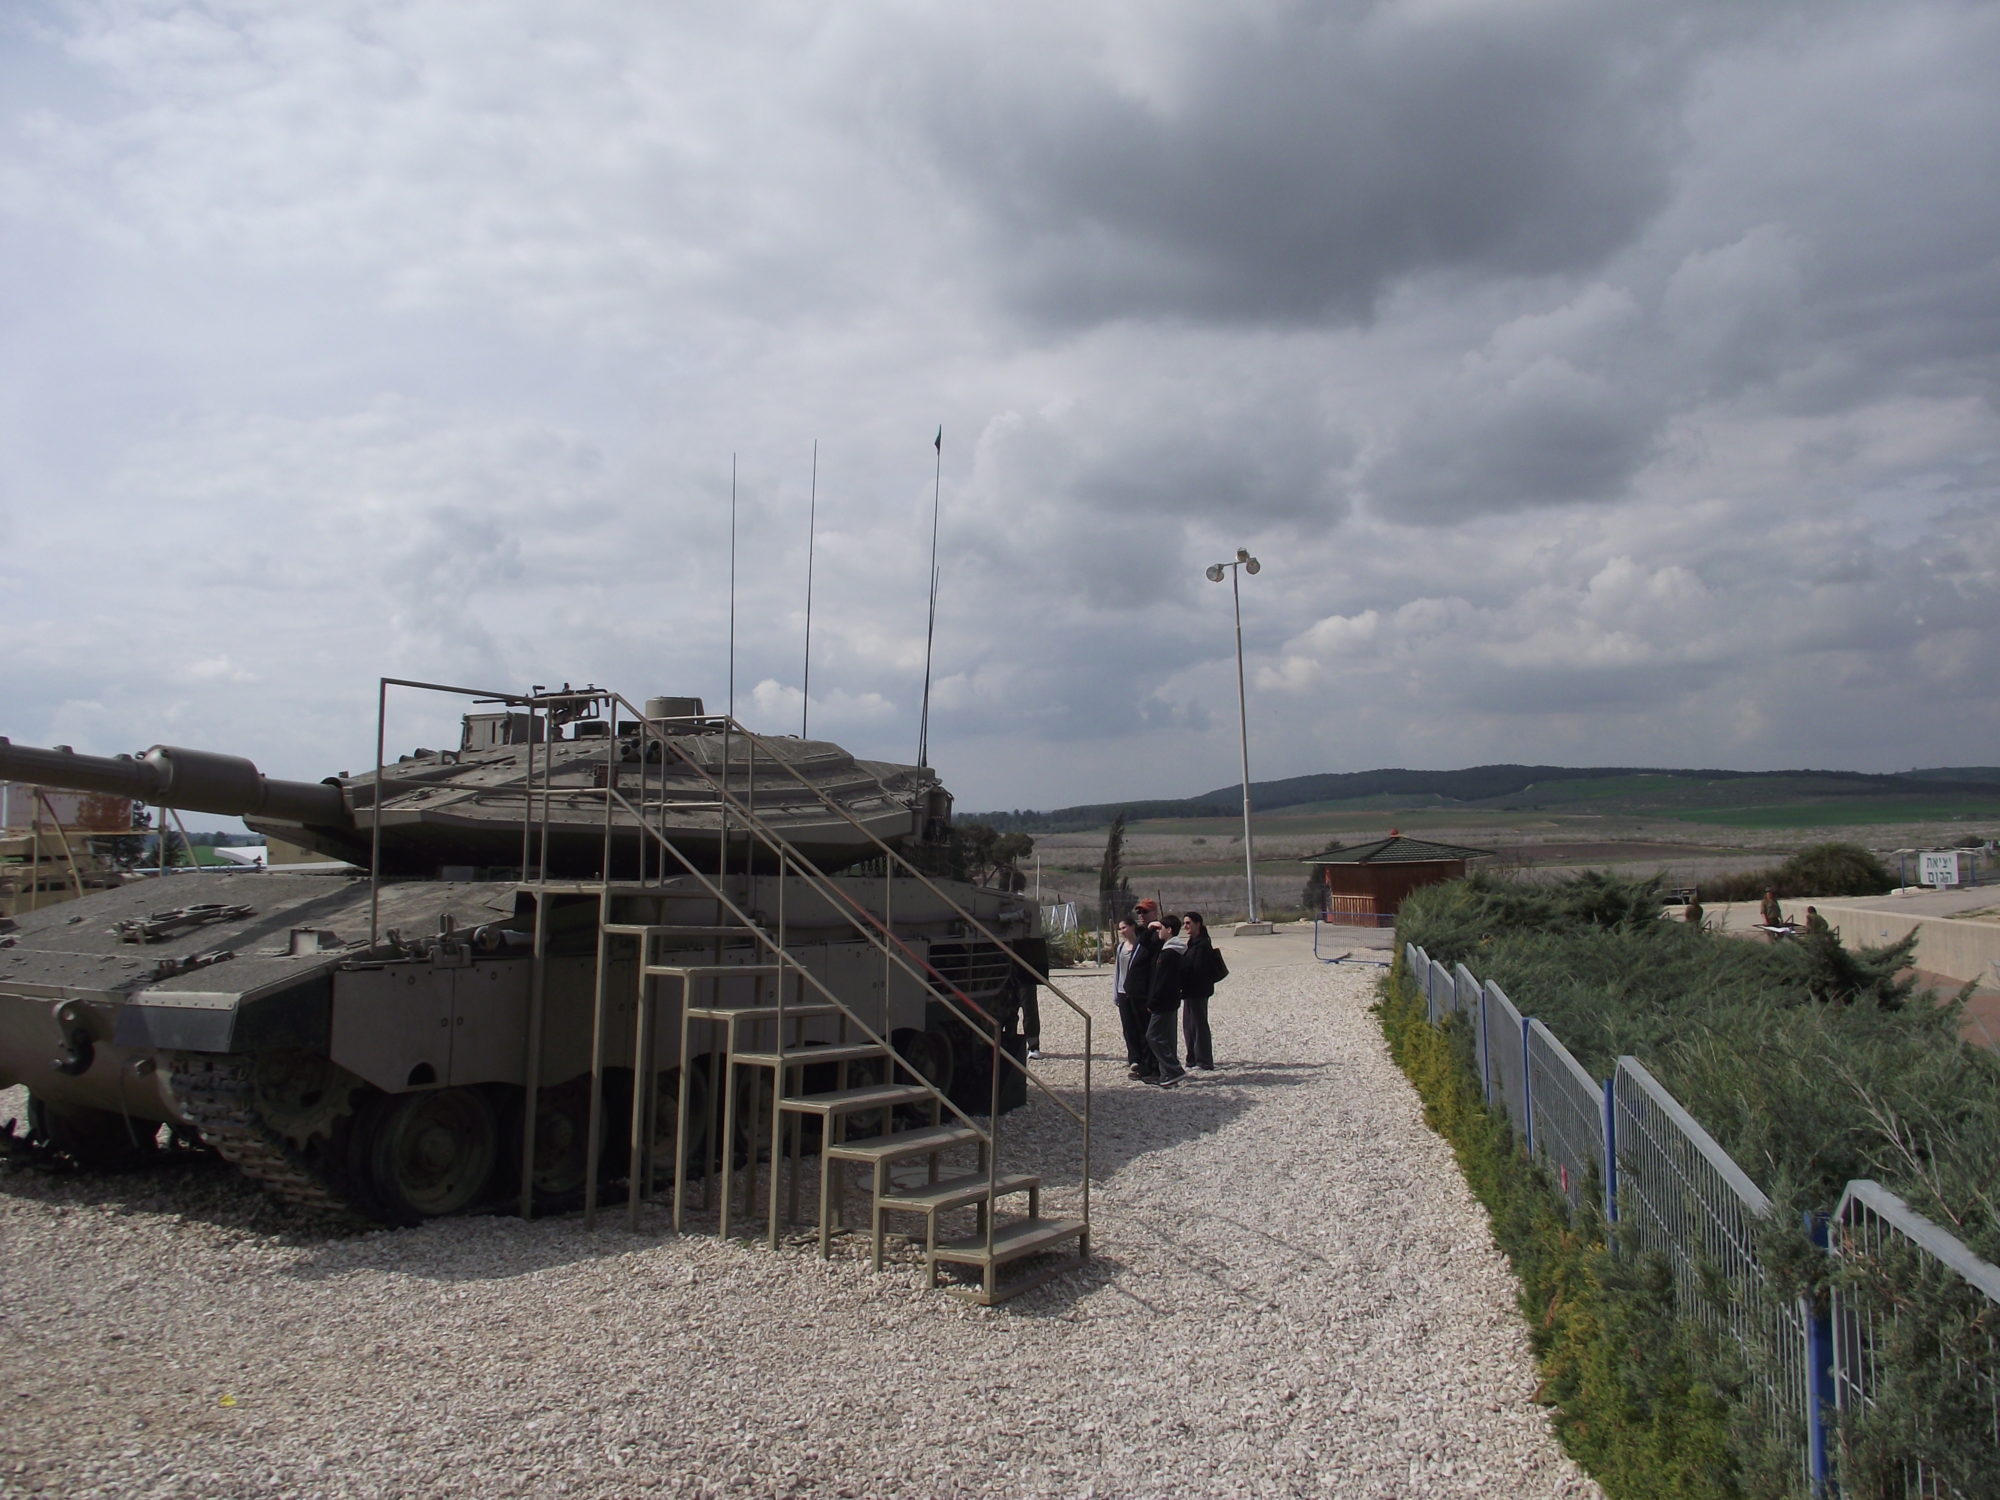 IDF Armored Corps Museum in Latrun